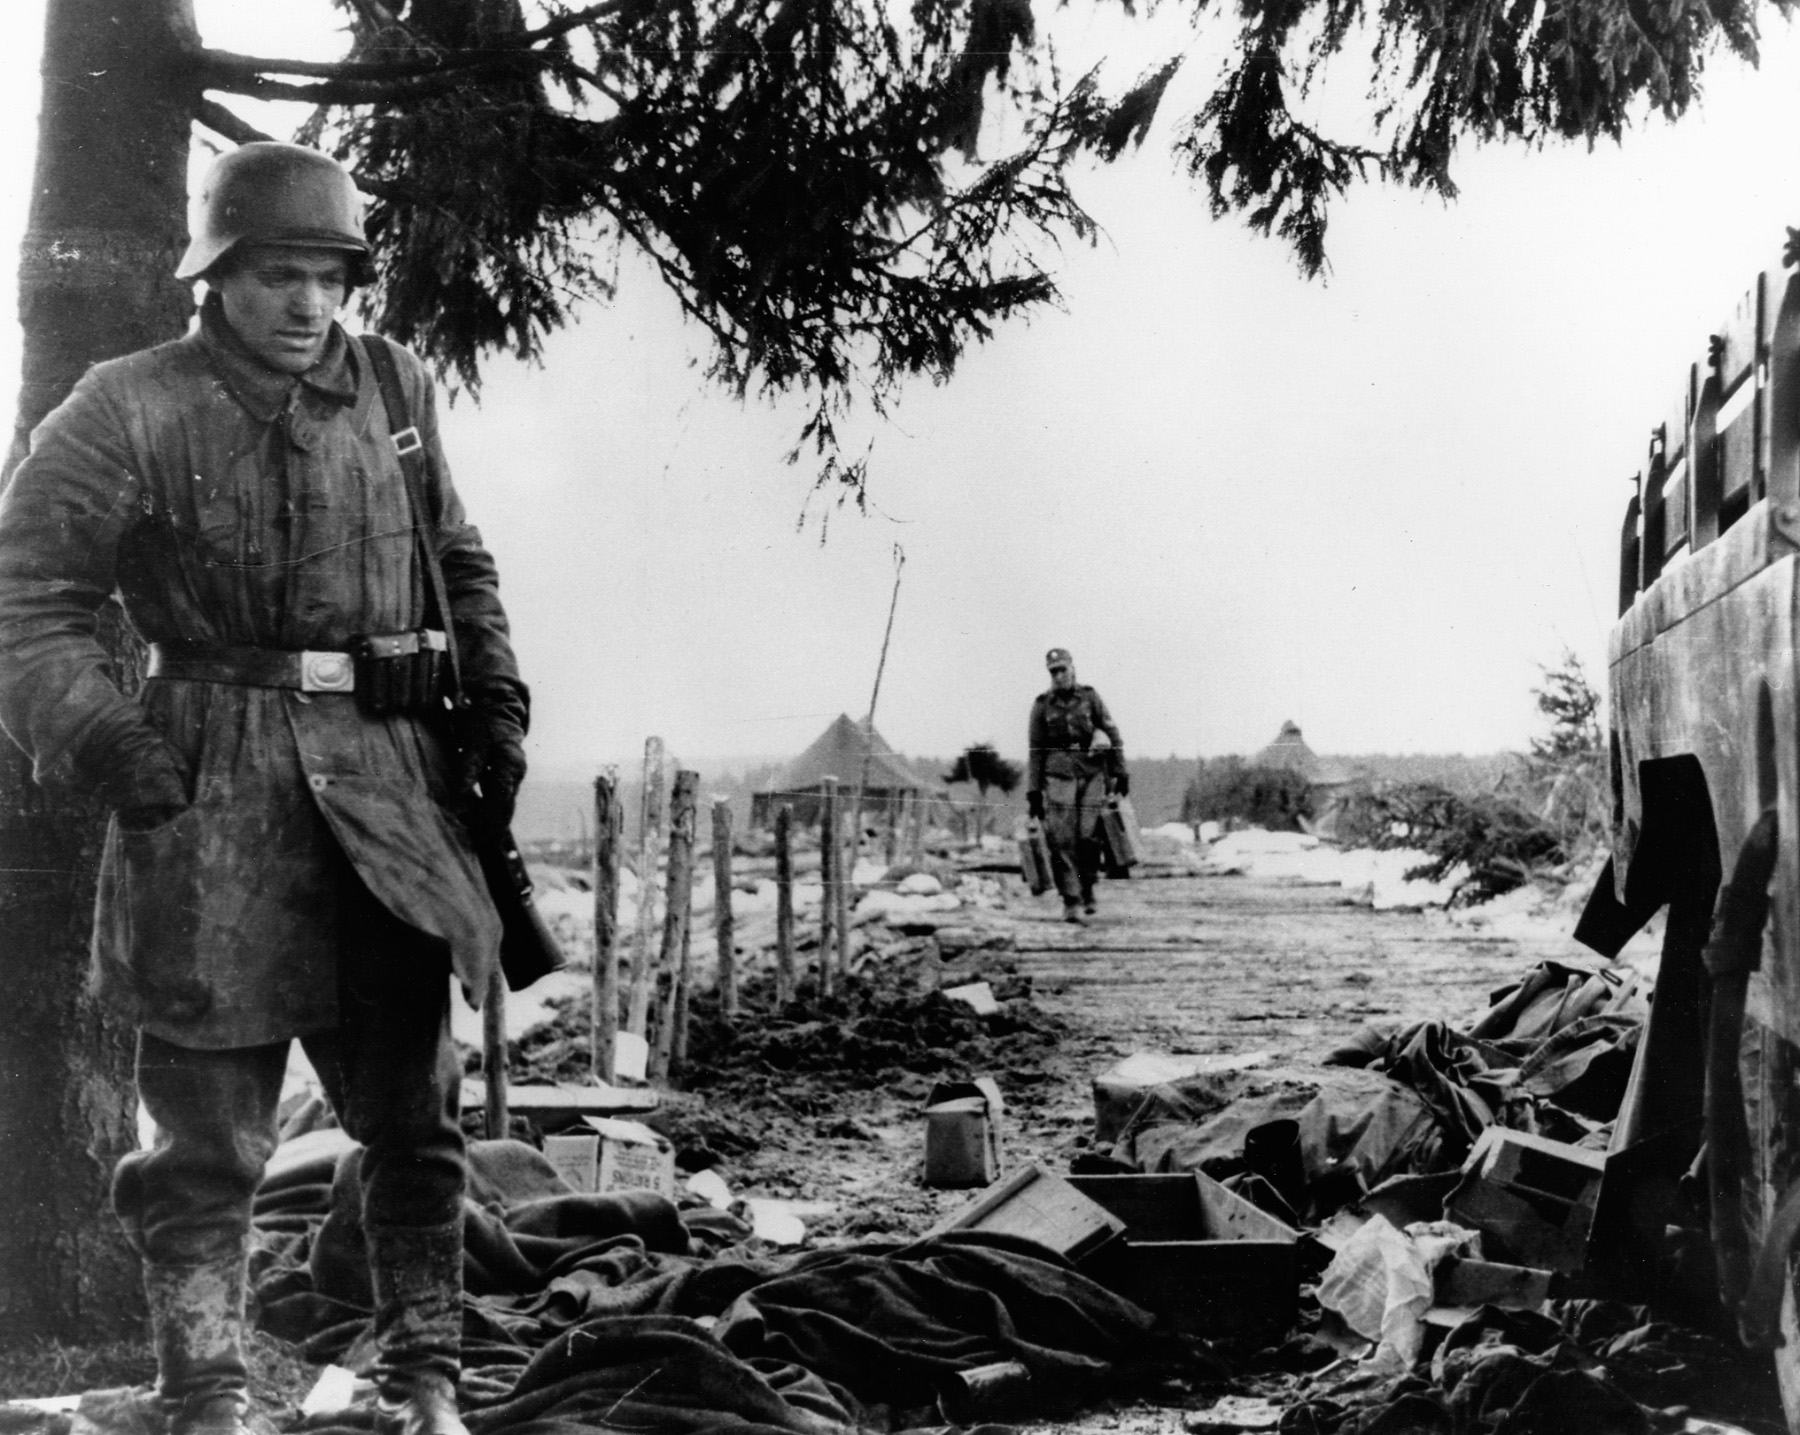 In another photo taken from a captured German camera, a soldier from the 18th Volksgrenadier Division, 5th Panzer Army examines scattered boxes and other items while scavenging through the camp of the U.S. 14th Cavalry Group.